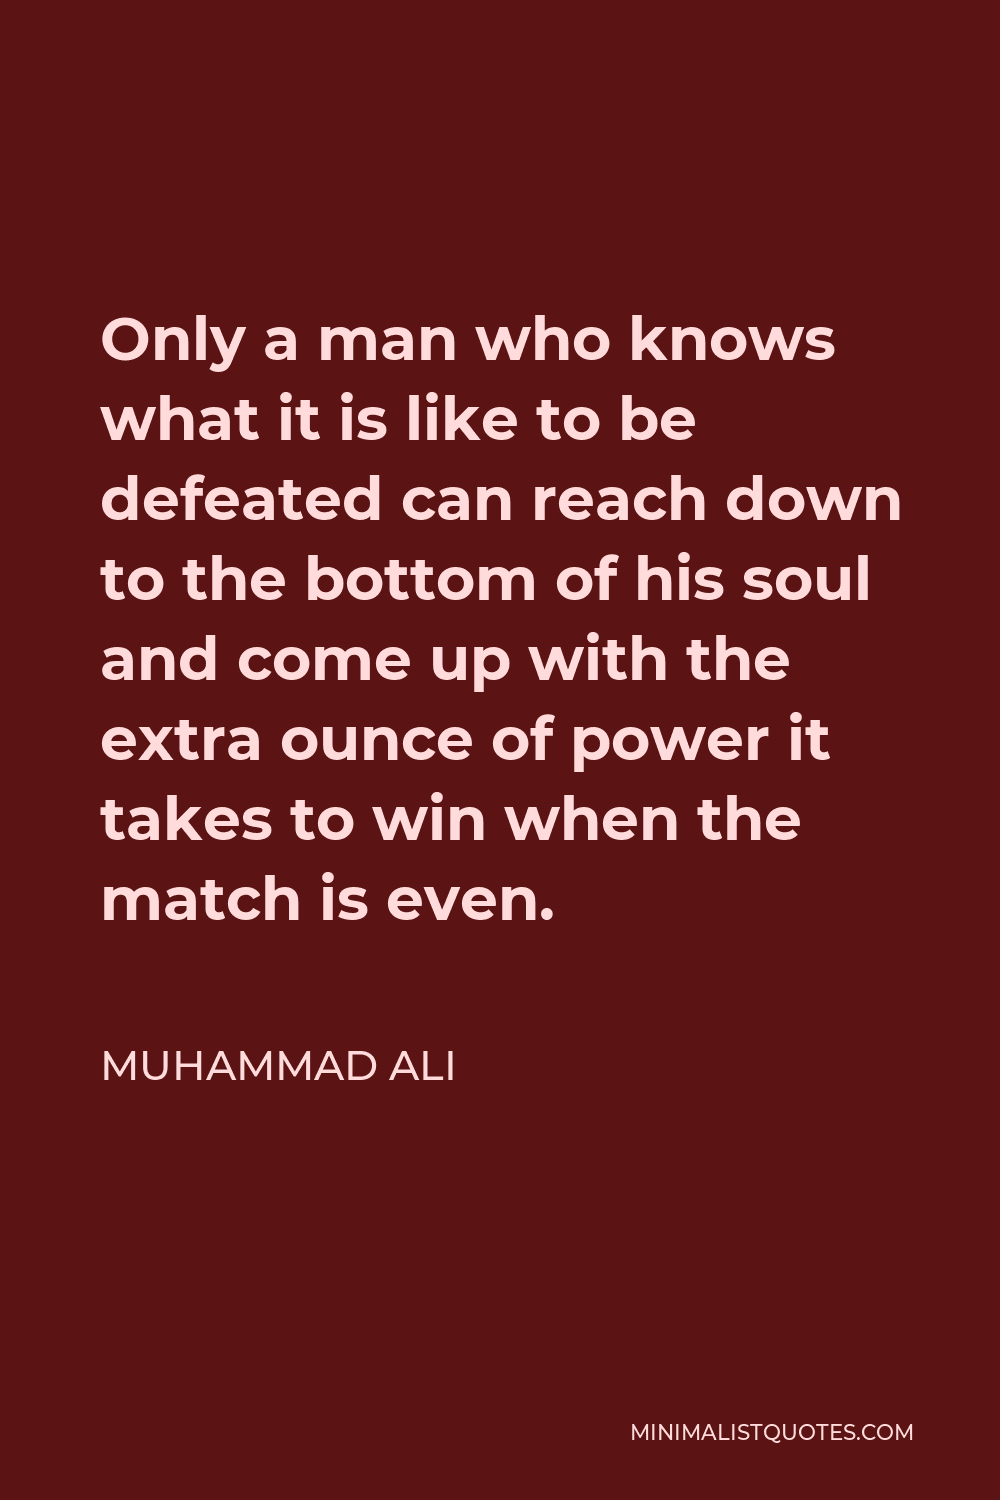 Muhammad Ali Quote - Only a man who knows what it is like to be defeated can reach down to the bottom of his soul and come up with the extra ounce of power it takes to win when the match is even.